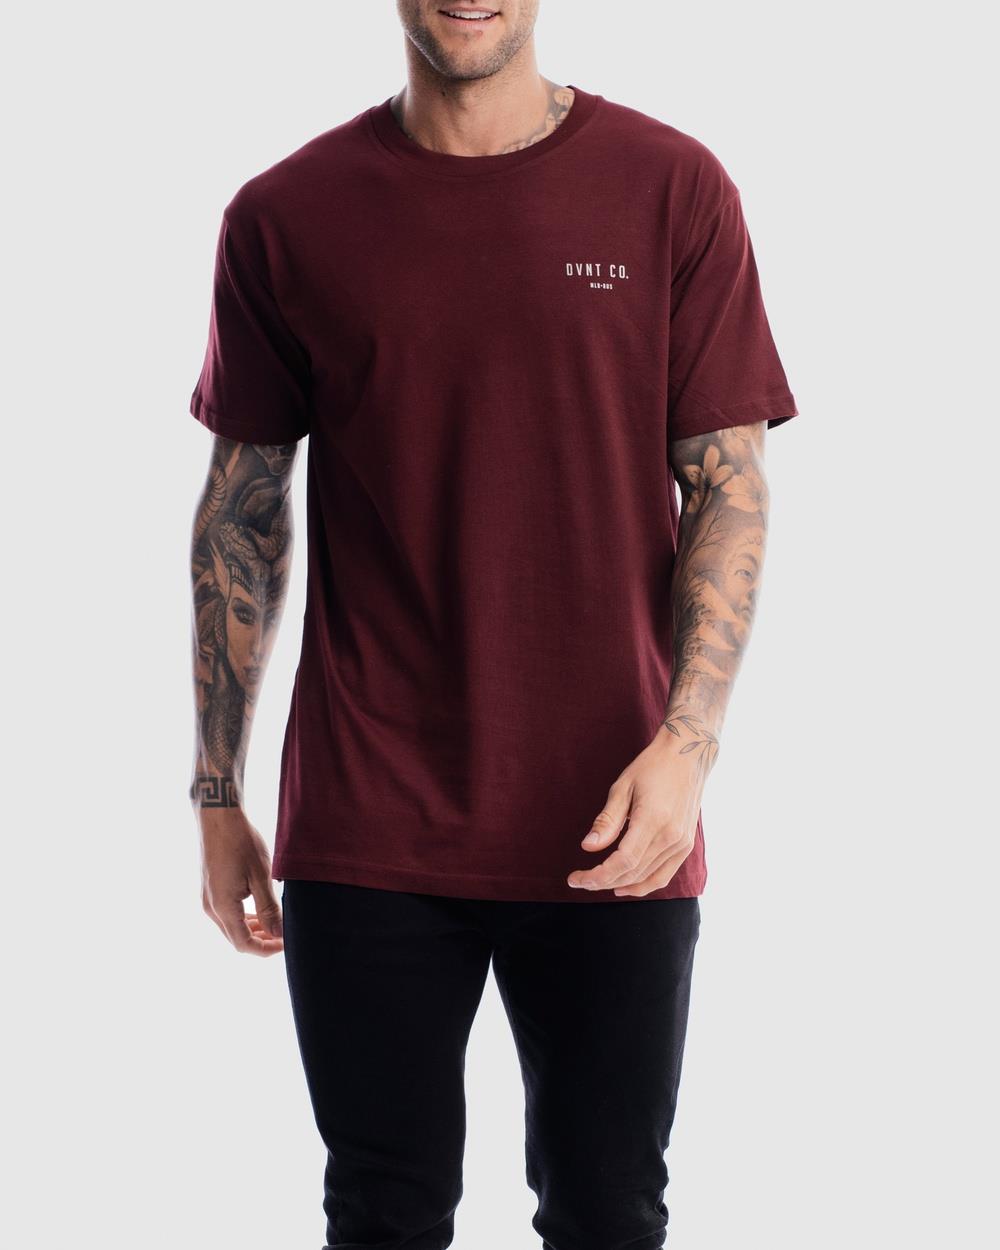 DVNT - Locale Tee - T-Shirts & Singlets (Oxblood) Locale Tee